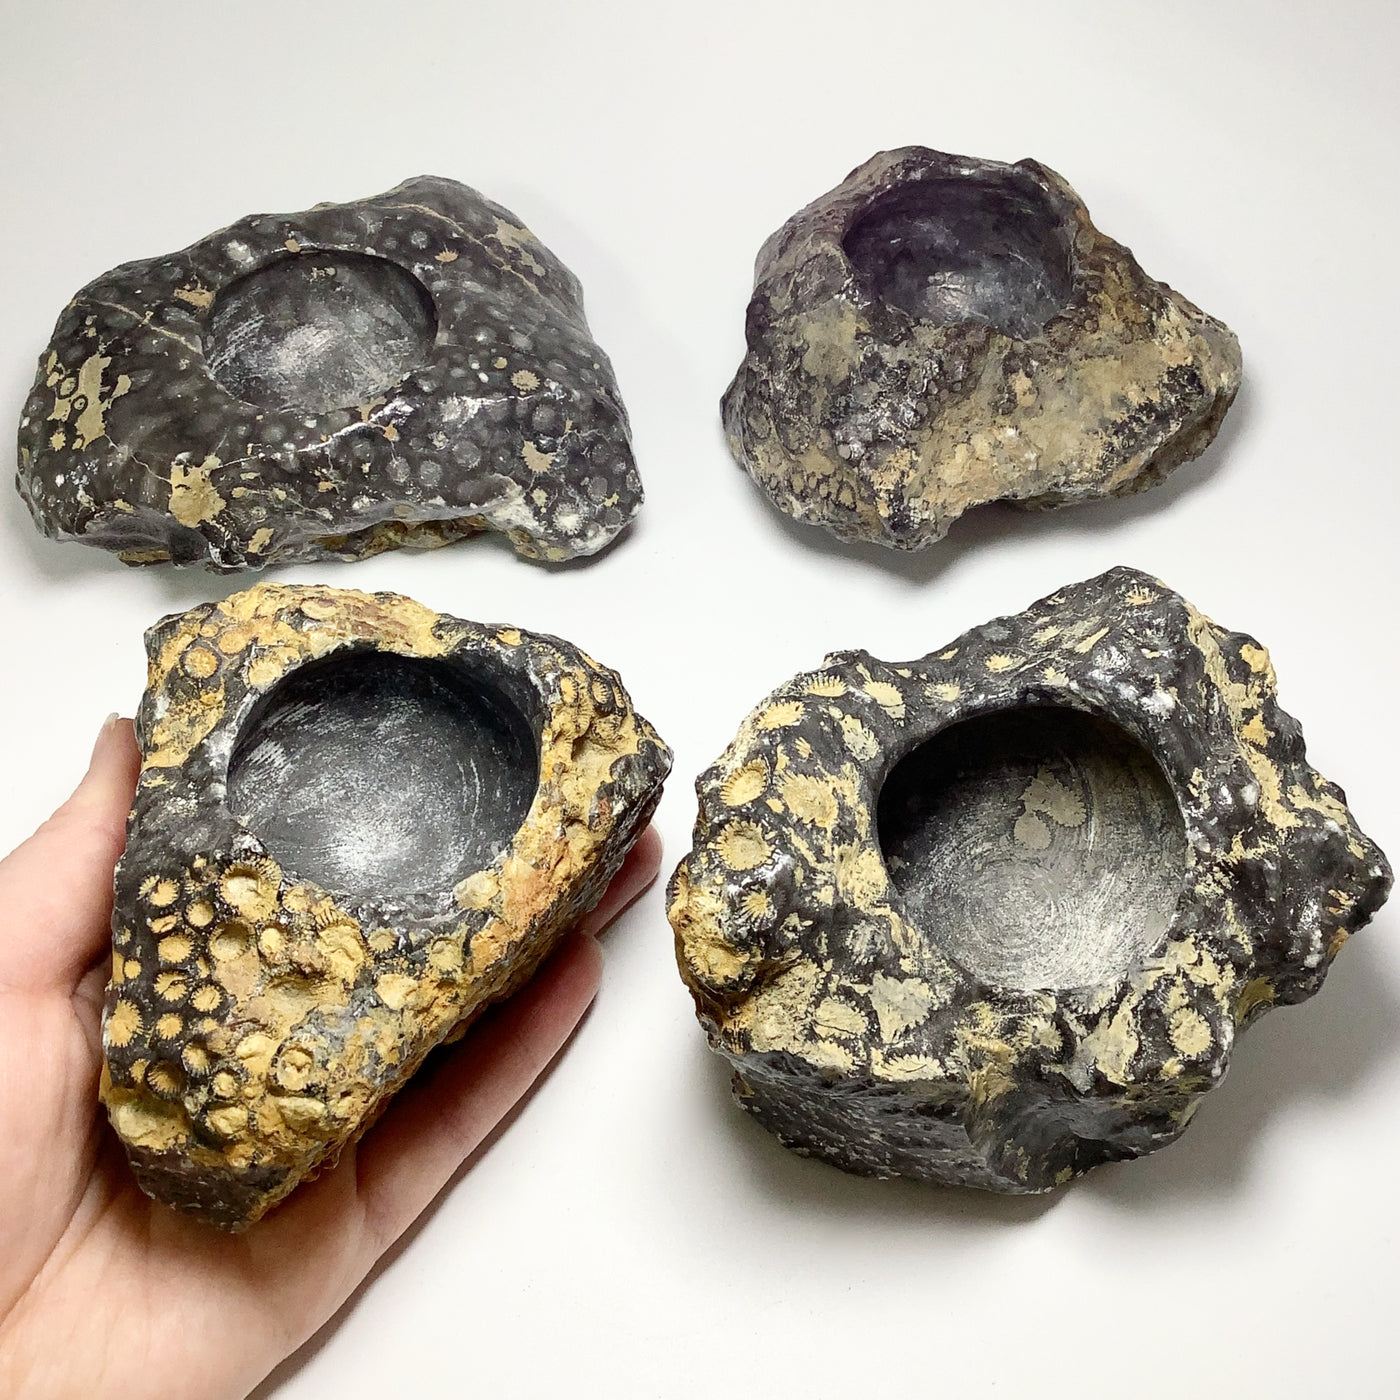 Fossilized Coral Bowl at $79 Each